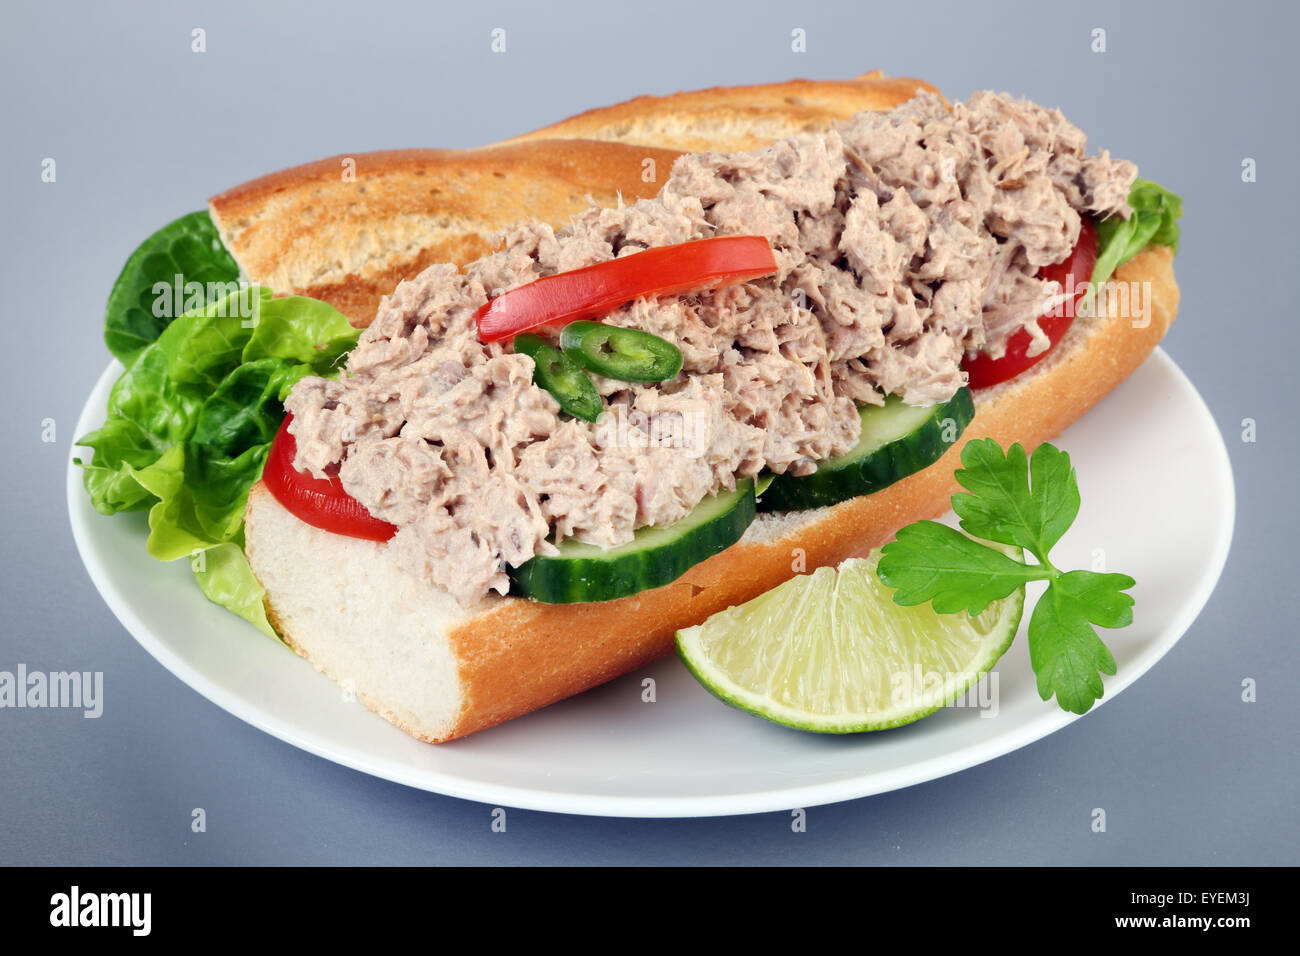 TUNA SALAD SANDWICH ON FRENCH BREAD BAGUETTE Stock Photo